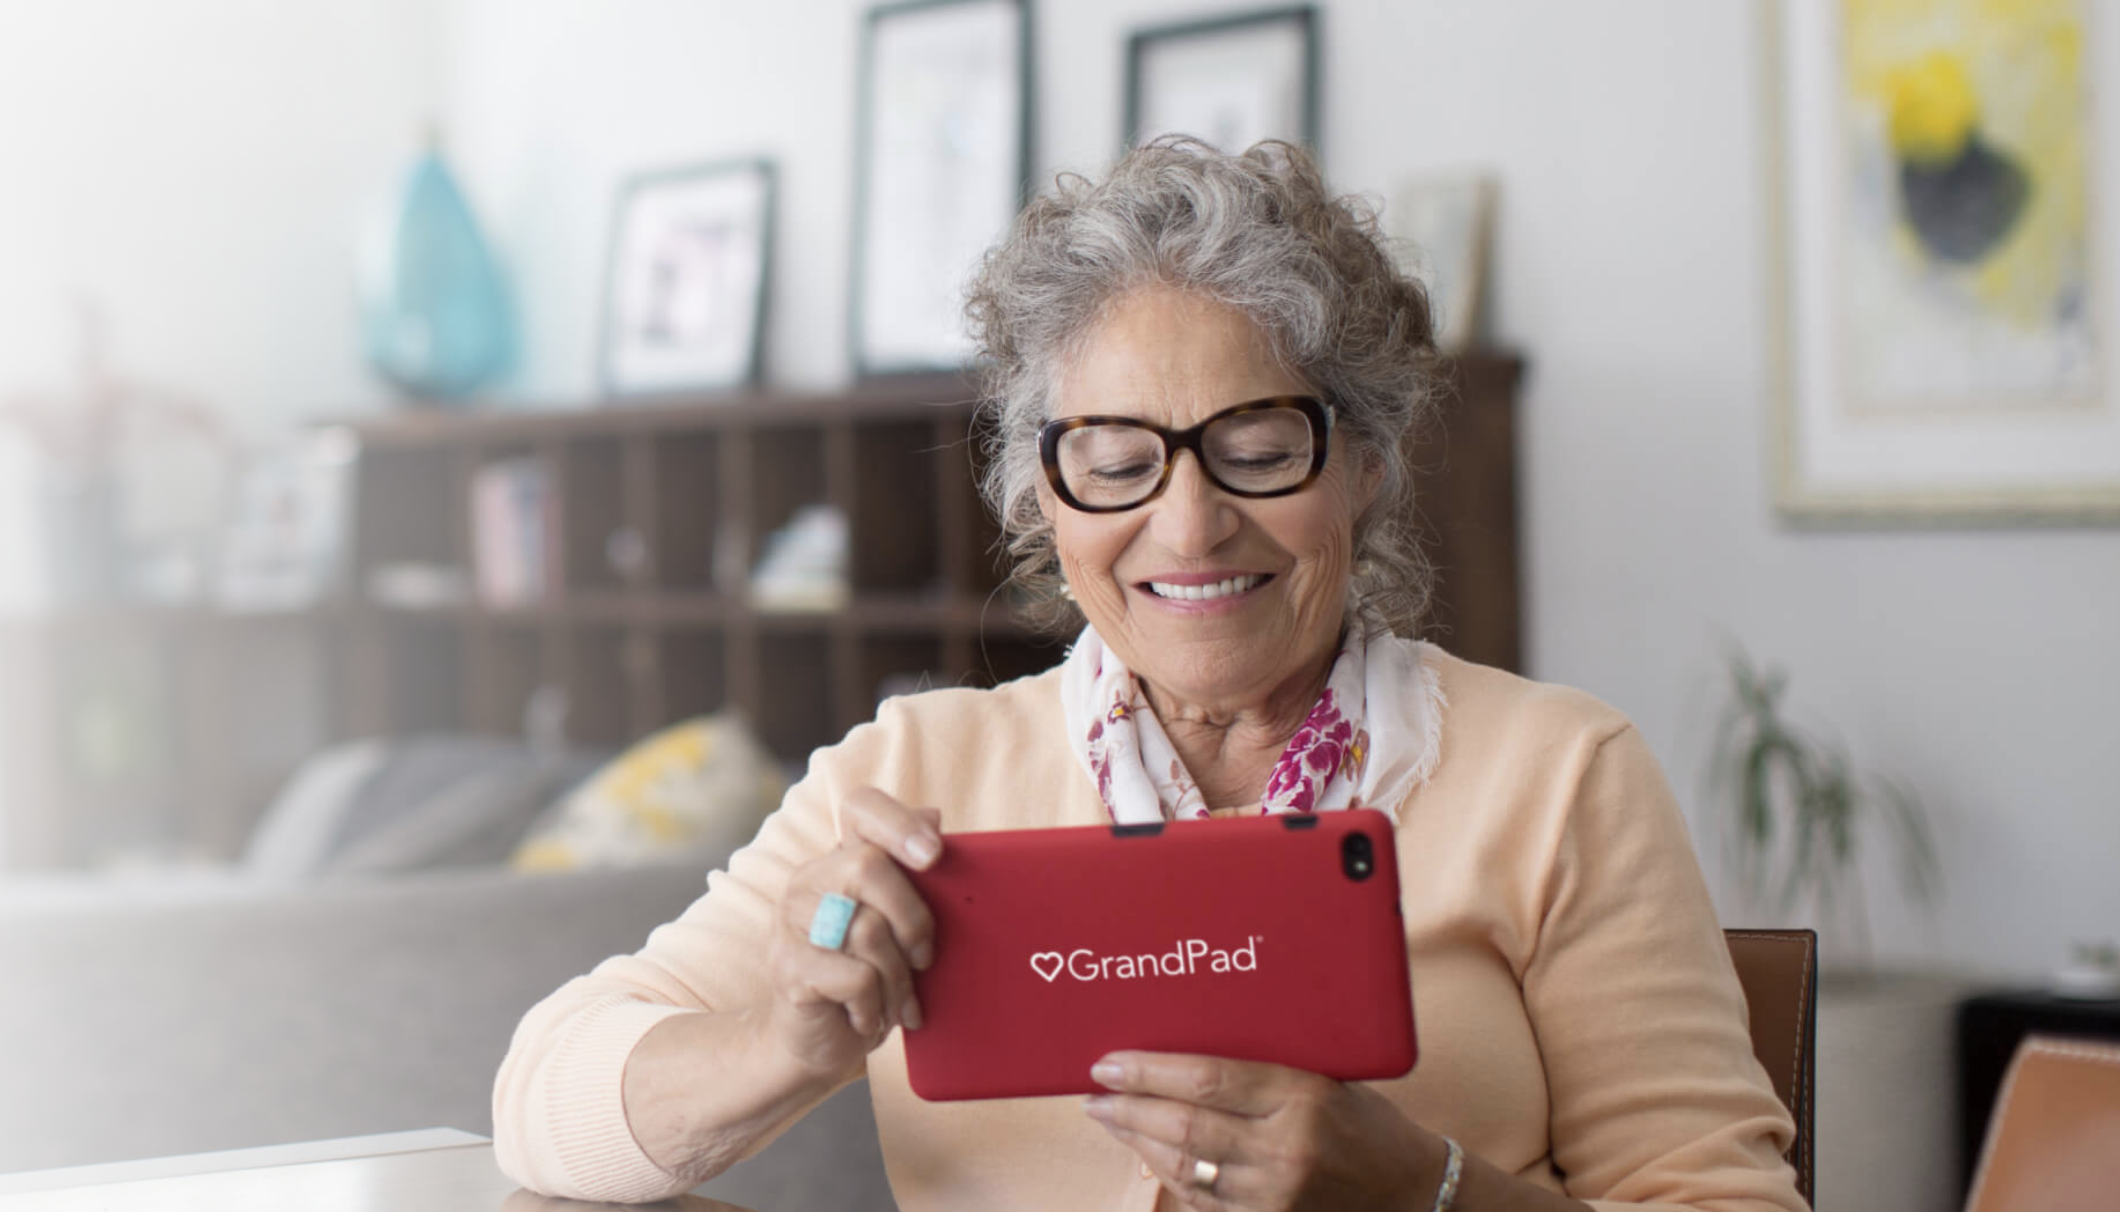 A picture of an older lady cradling the GrandPad tablet. She wears glasses. The tablet is red.